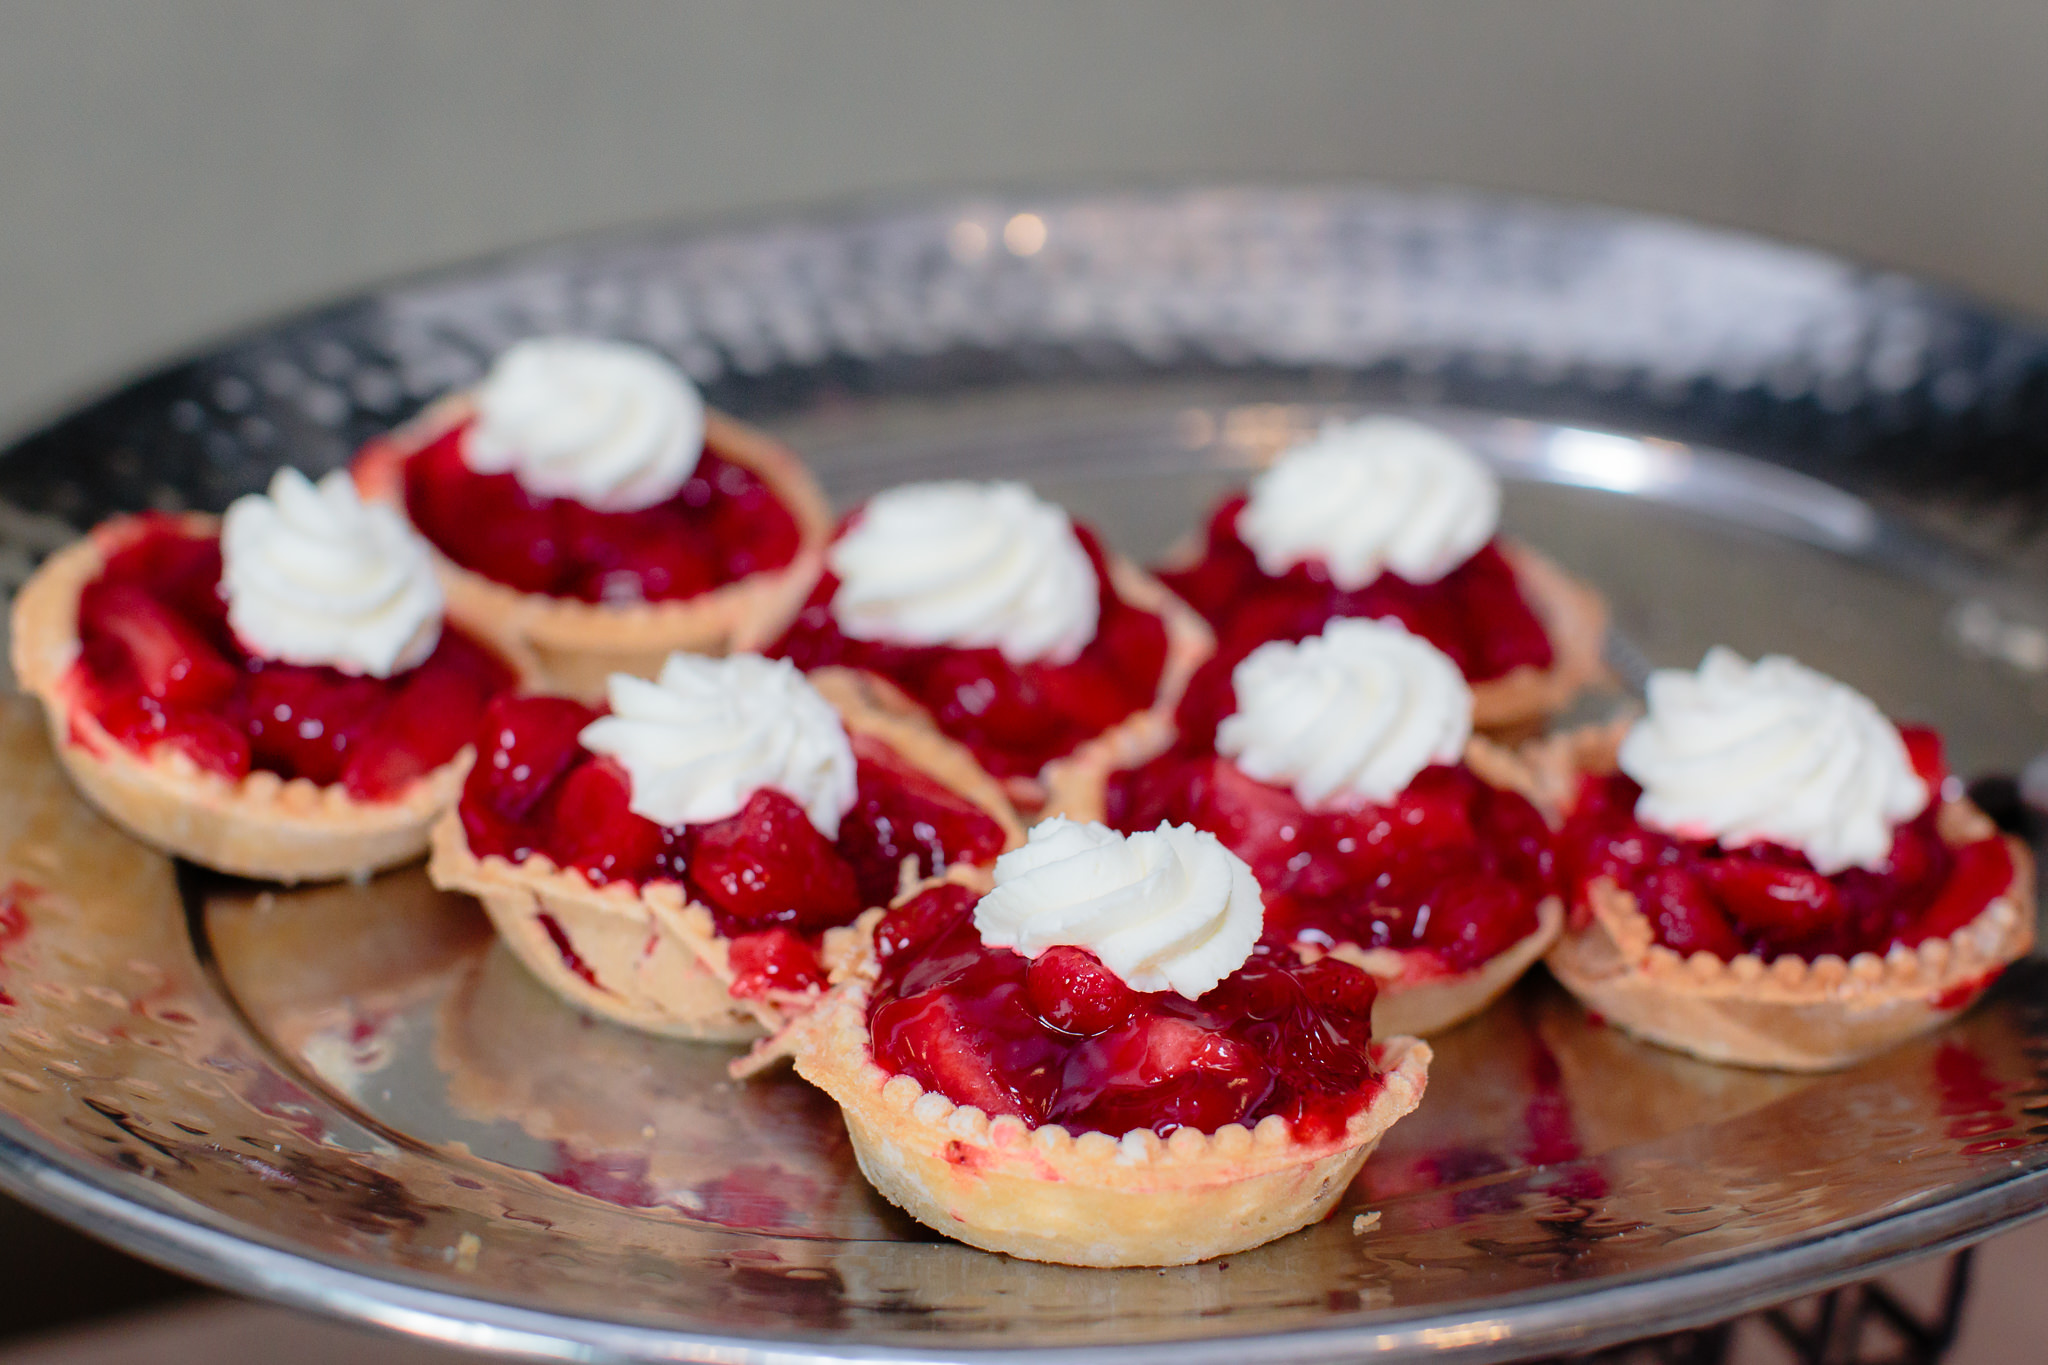 Mini strawberry pies at a Duquesne University wedding reception by Signature Desserts